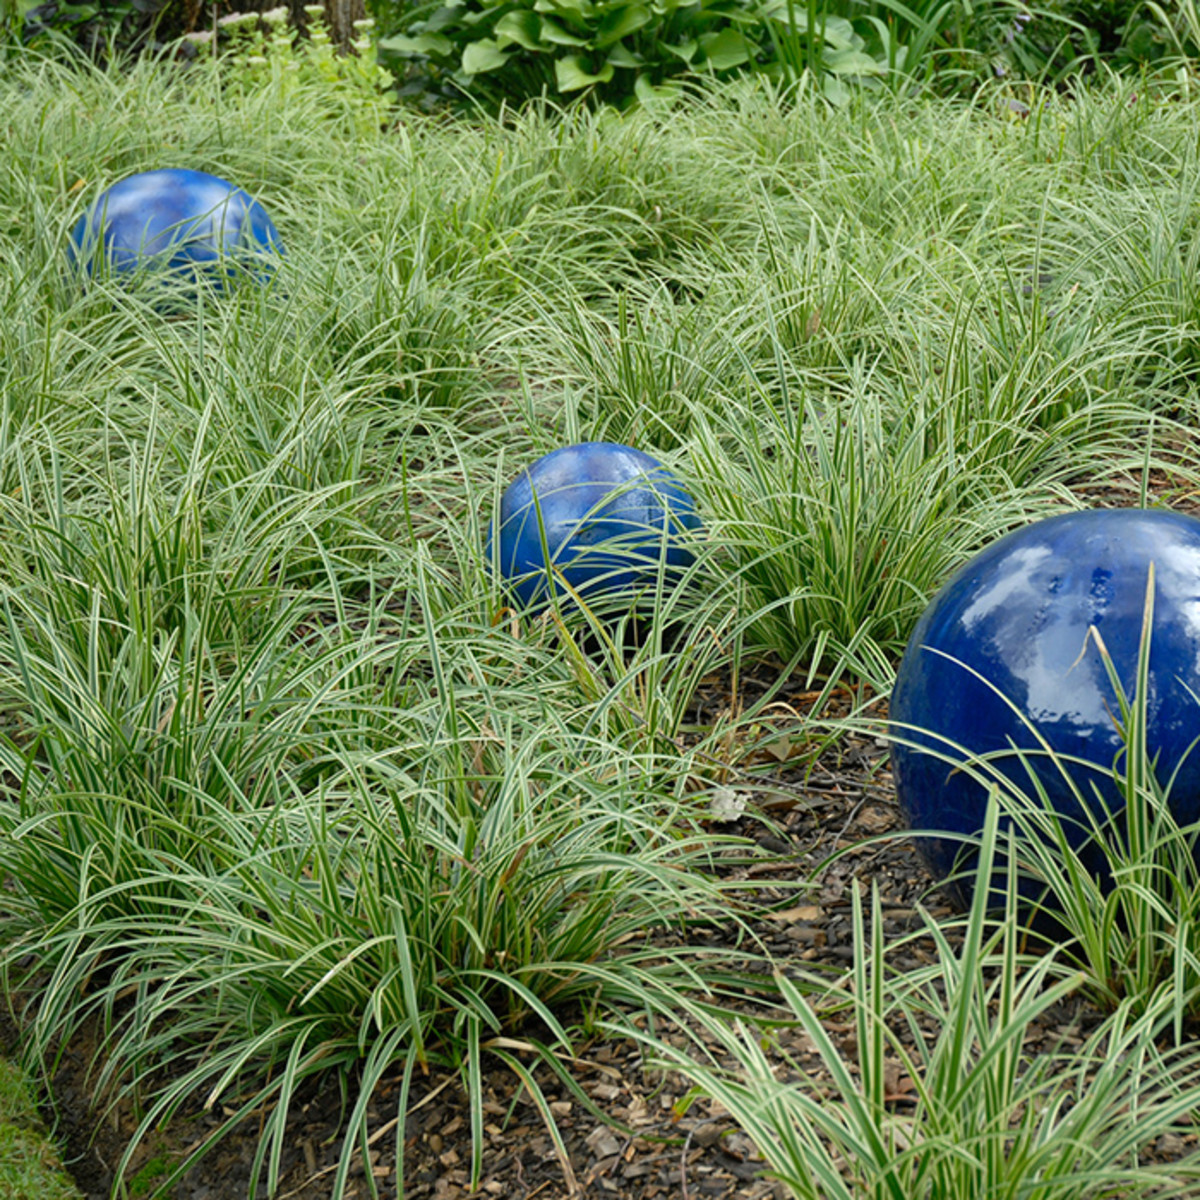 'Ice Dance' carex is one example of an ornamental grass for shade.